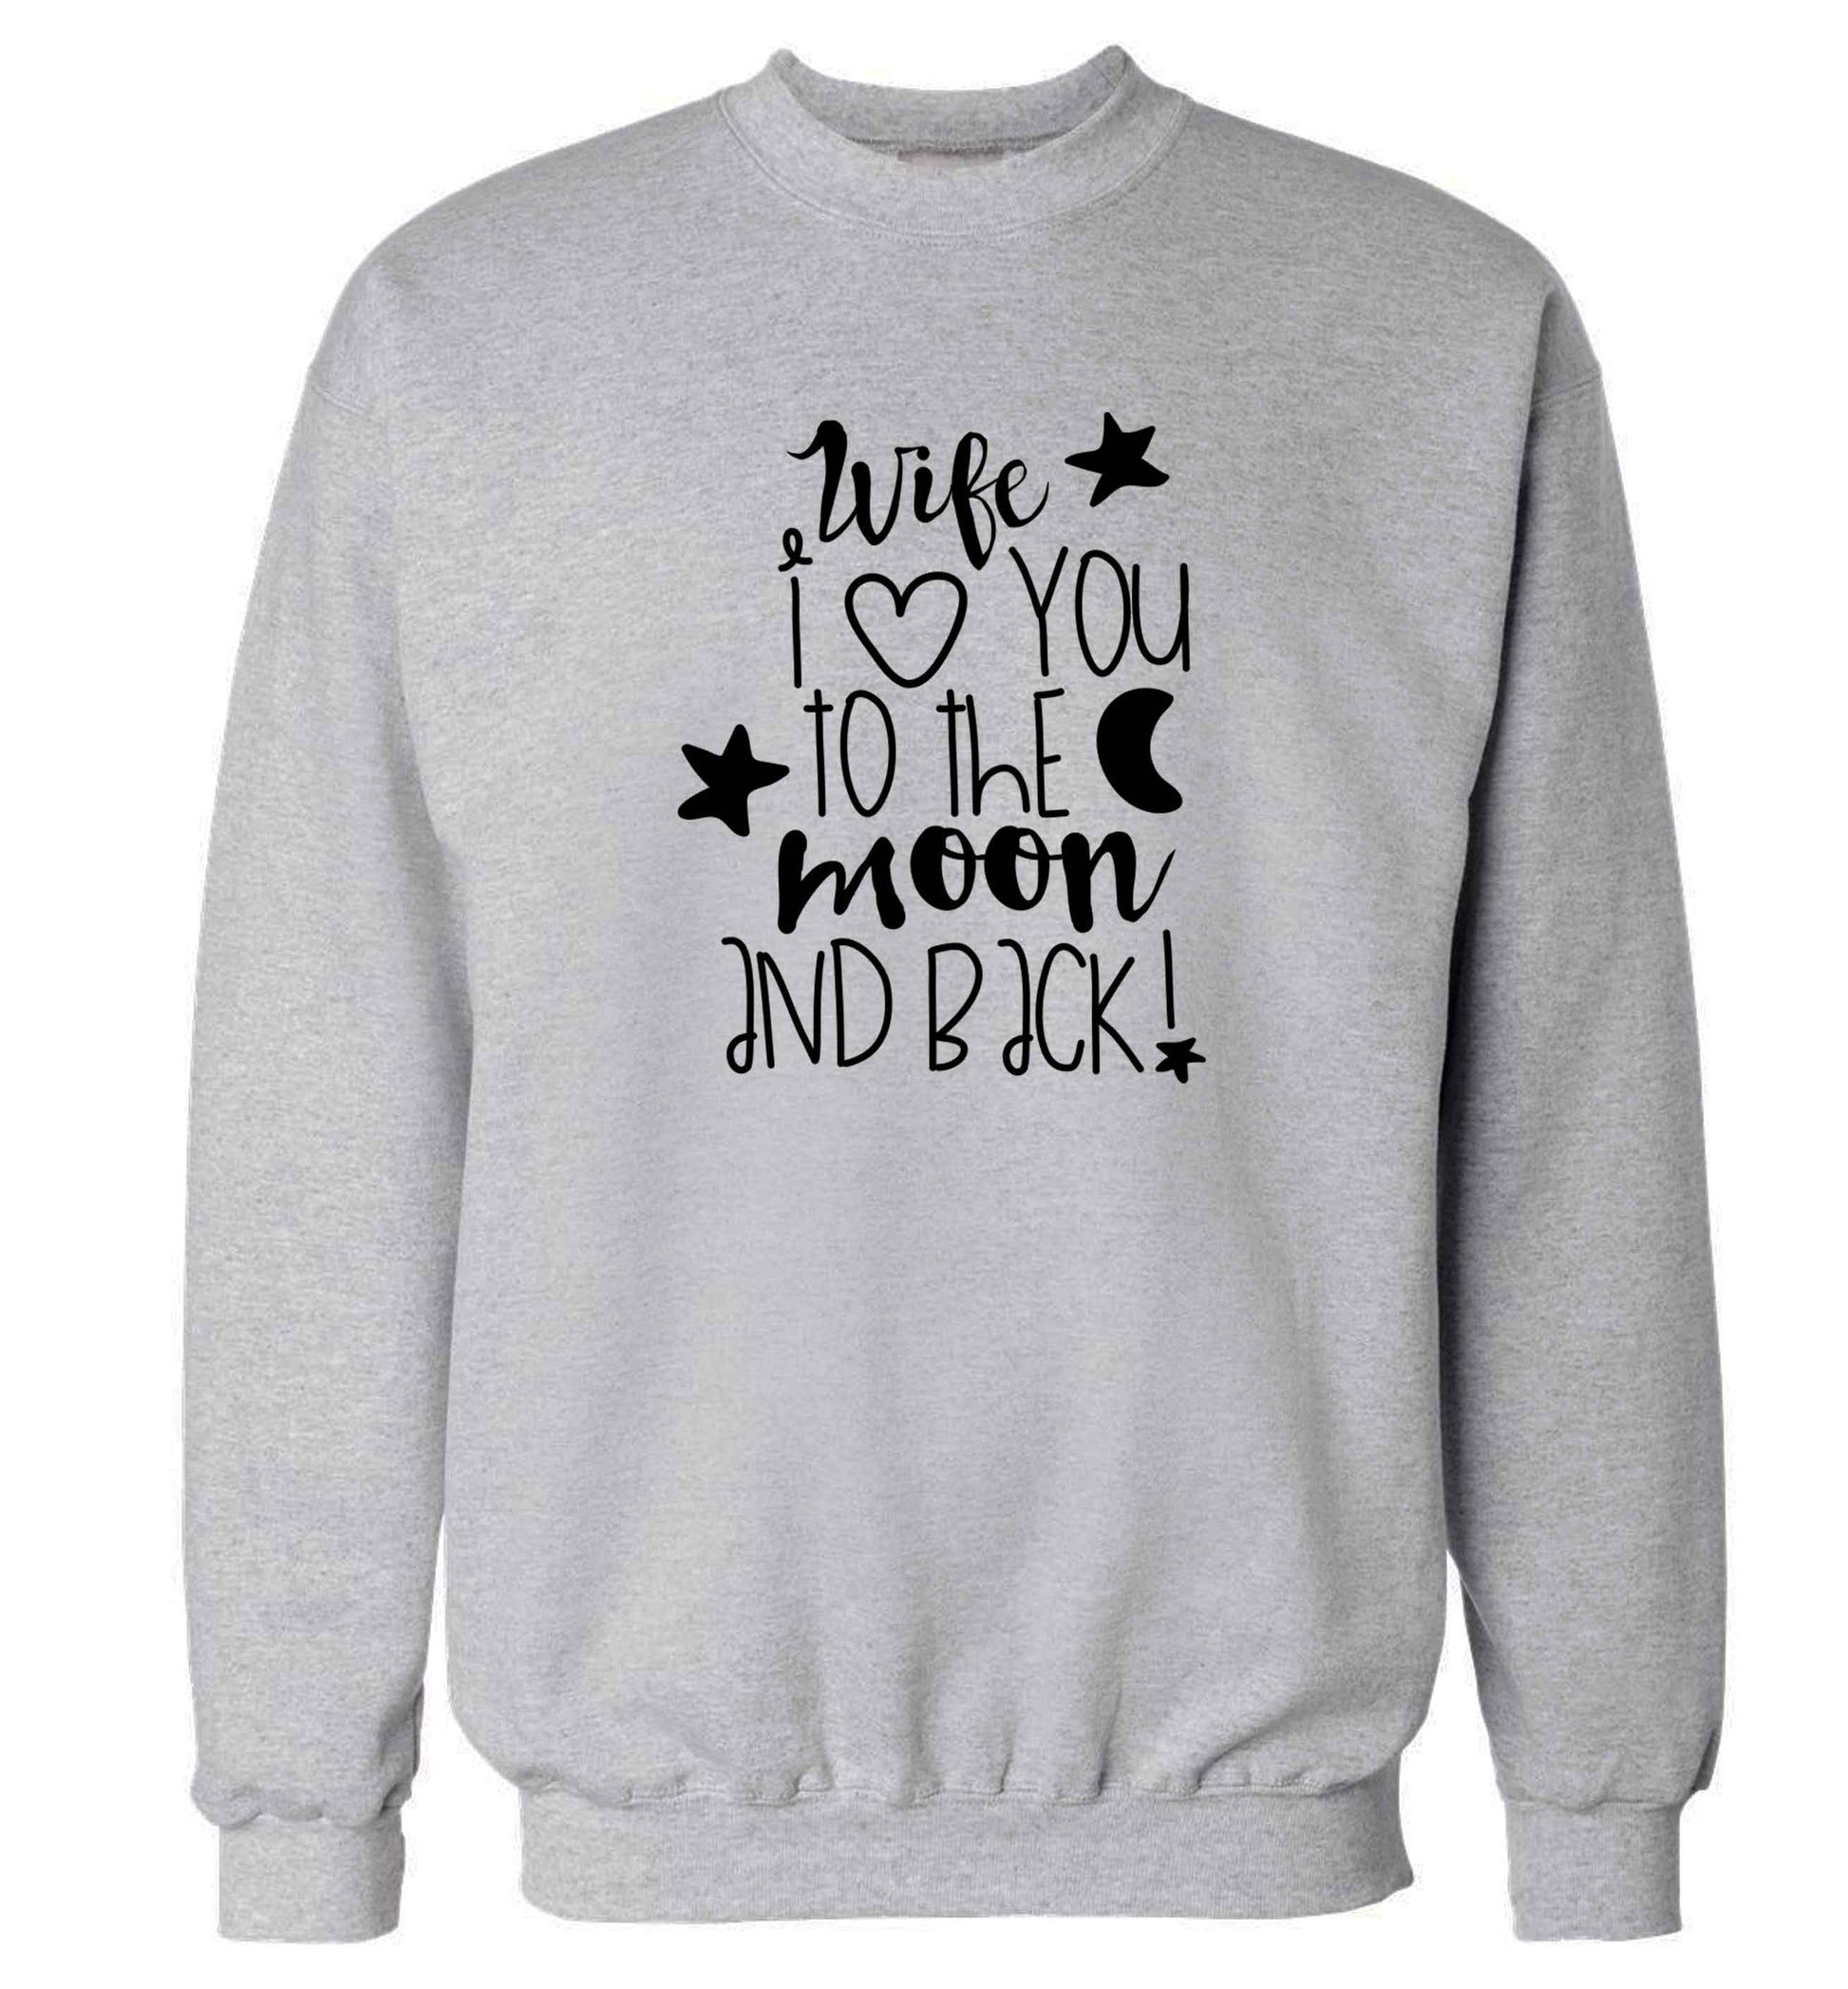 Wife I love you to the moon and back adult's unisex grey sweater 2XL